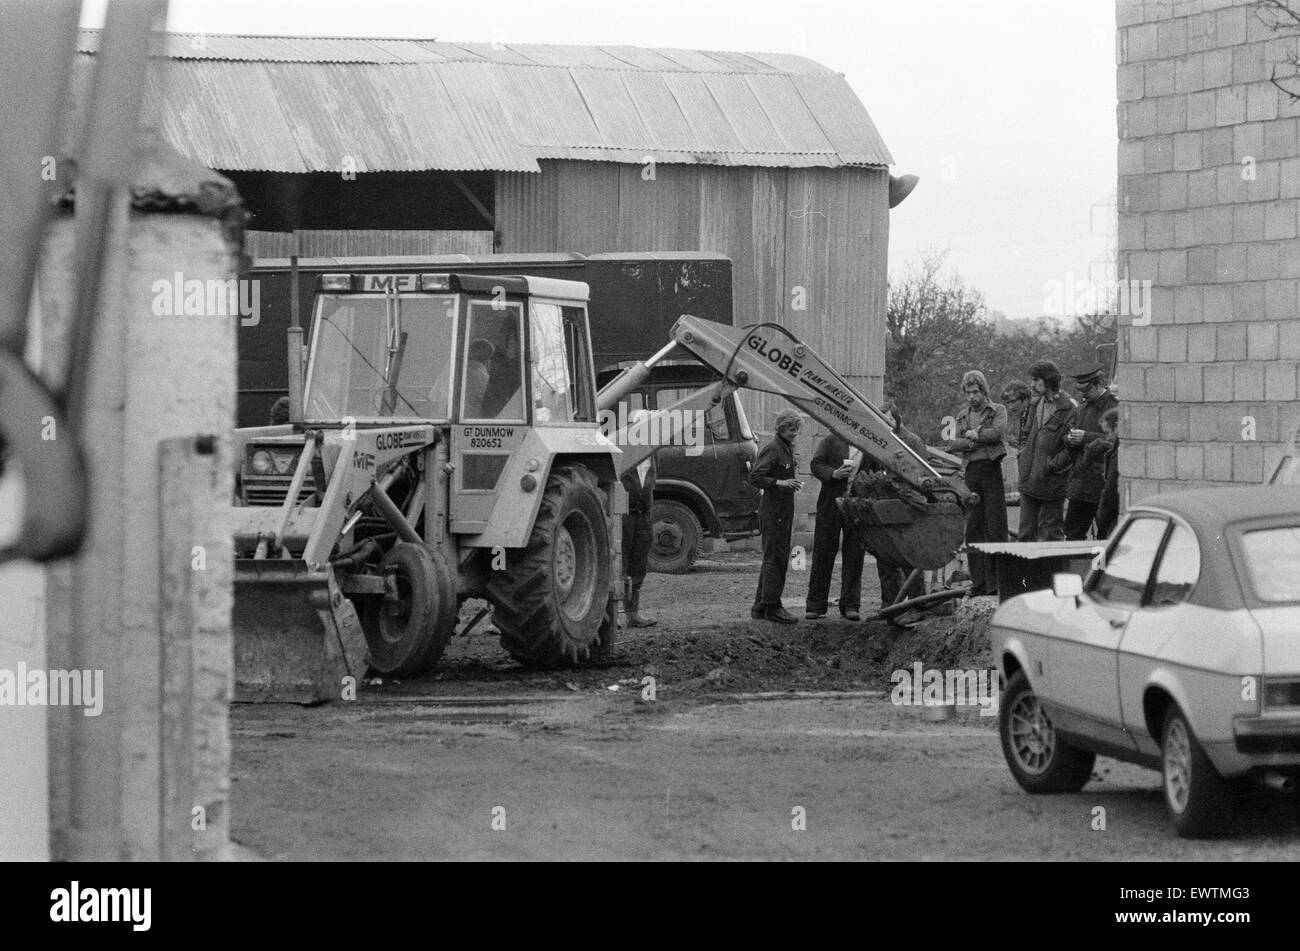 Police Investigation into disappearance of haulage contractor  George Brett and his son Terry Brett aged 10, who are missing under mysterious circumstances. Pictured, Police search Mount Pleasant Farm at Hornchurch, Essex, 13th October 1976. Stock Photo